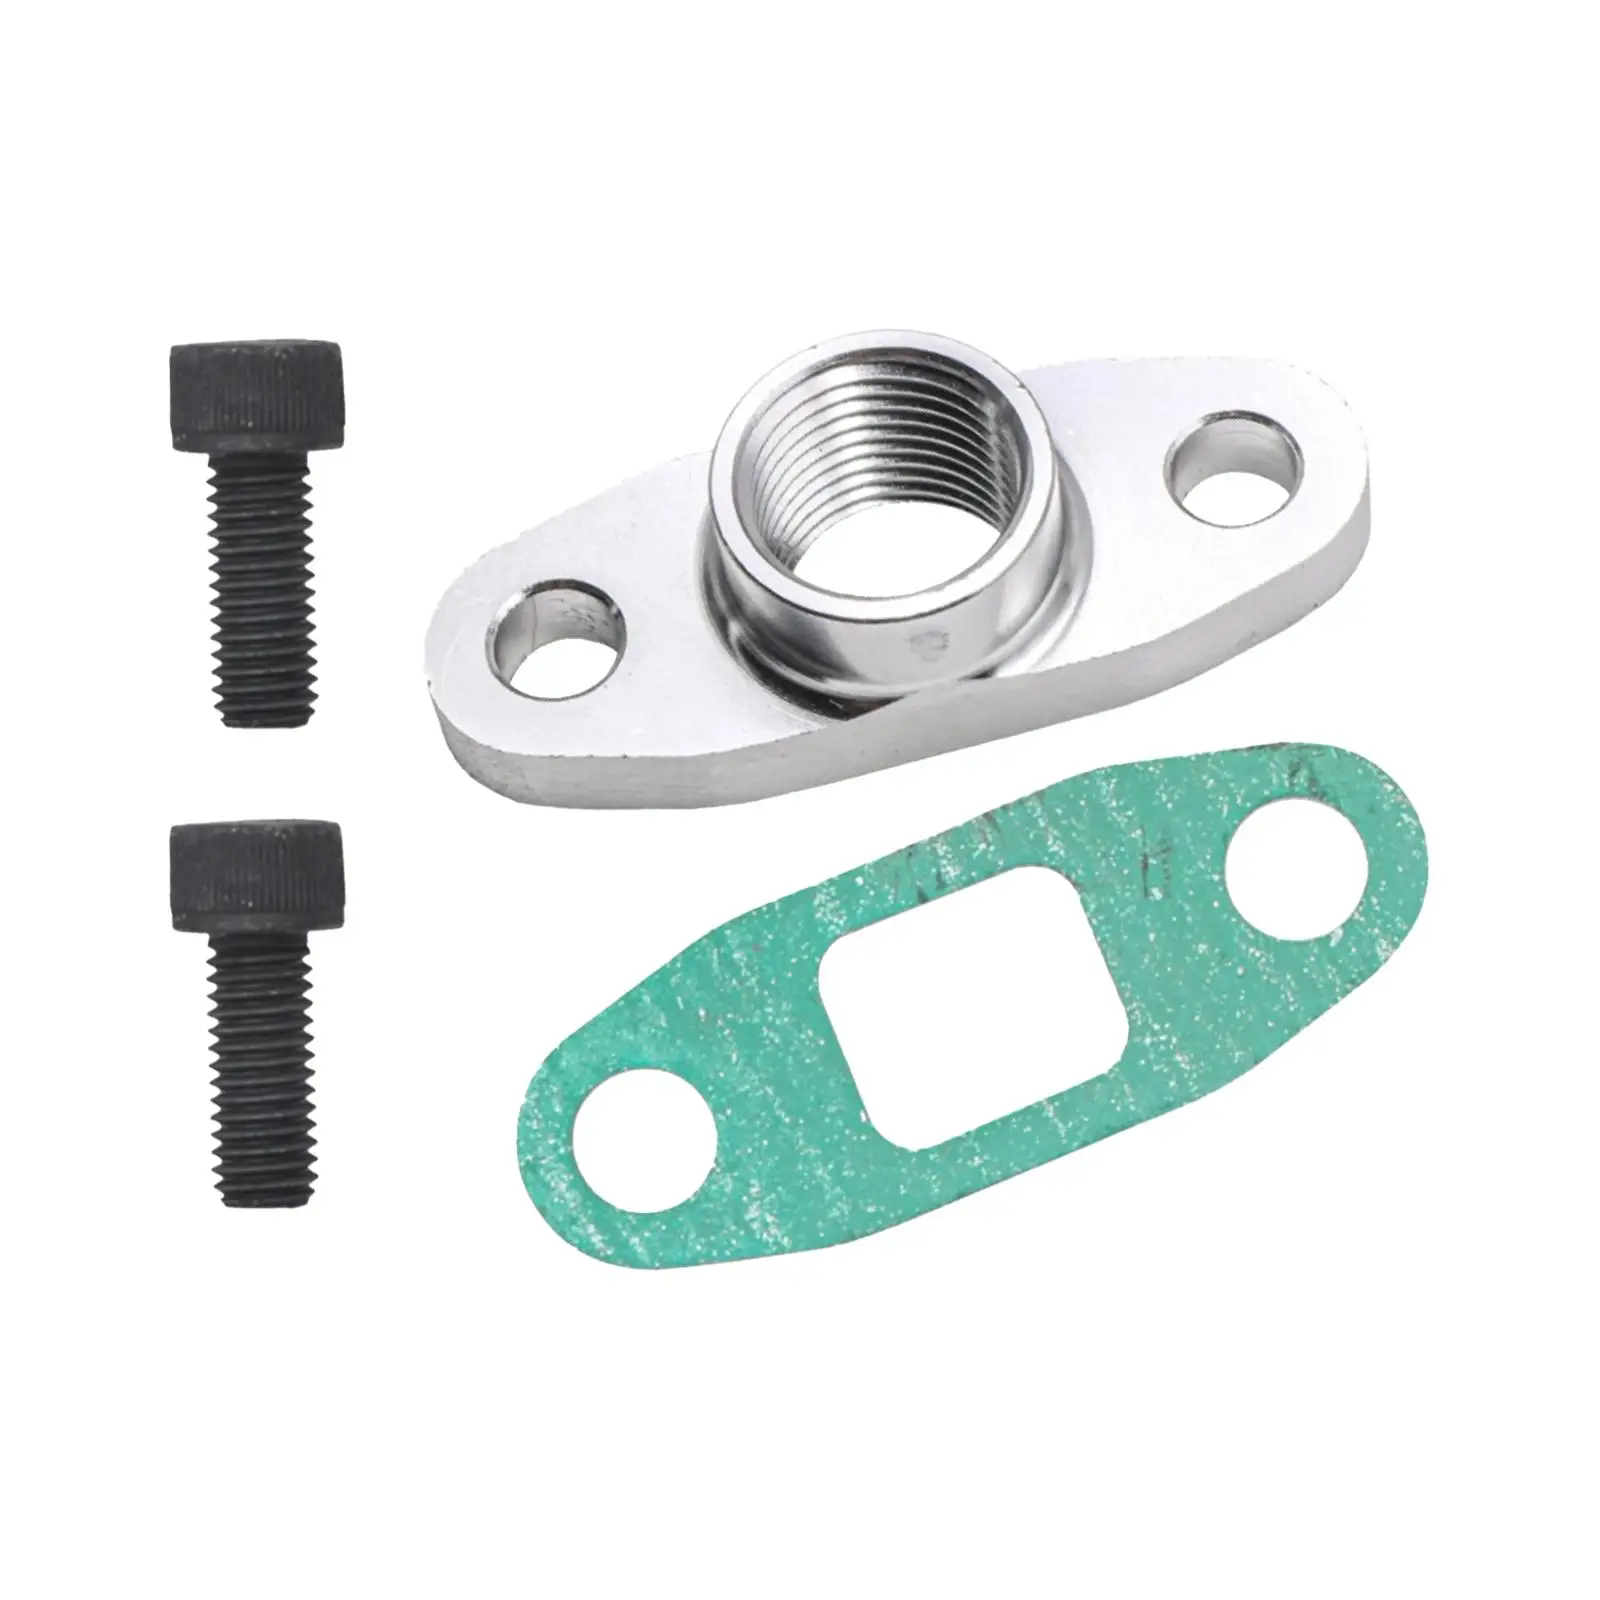 Oil feed Inlet Flange Gasket Fitting Set Aluminum Alloy for GT32 T4 T66